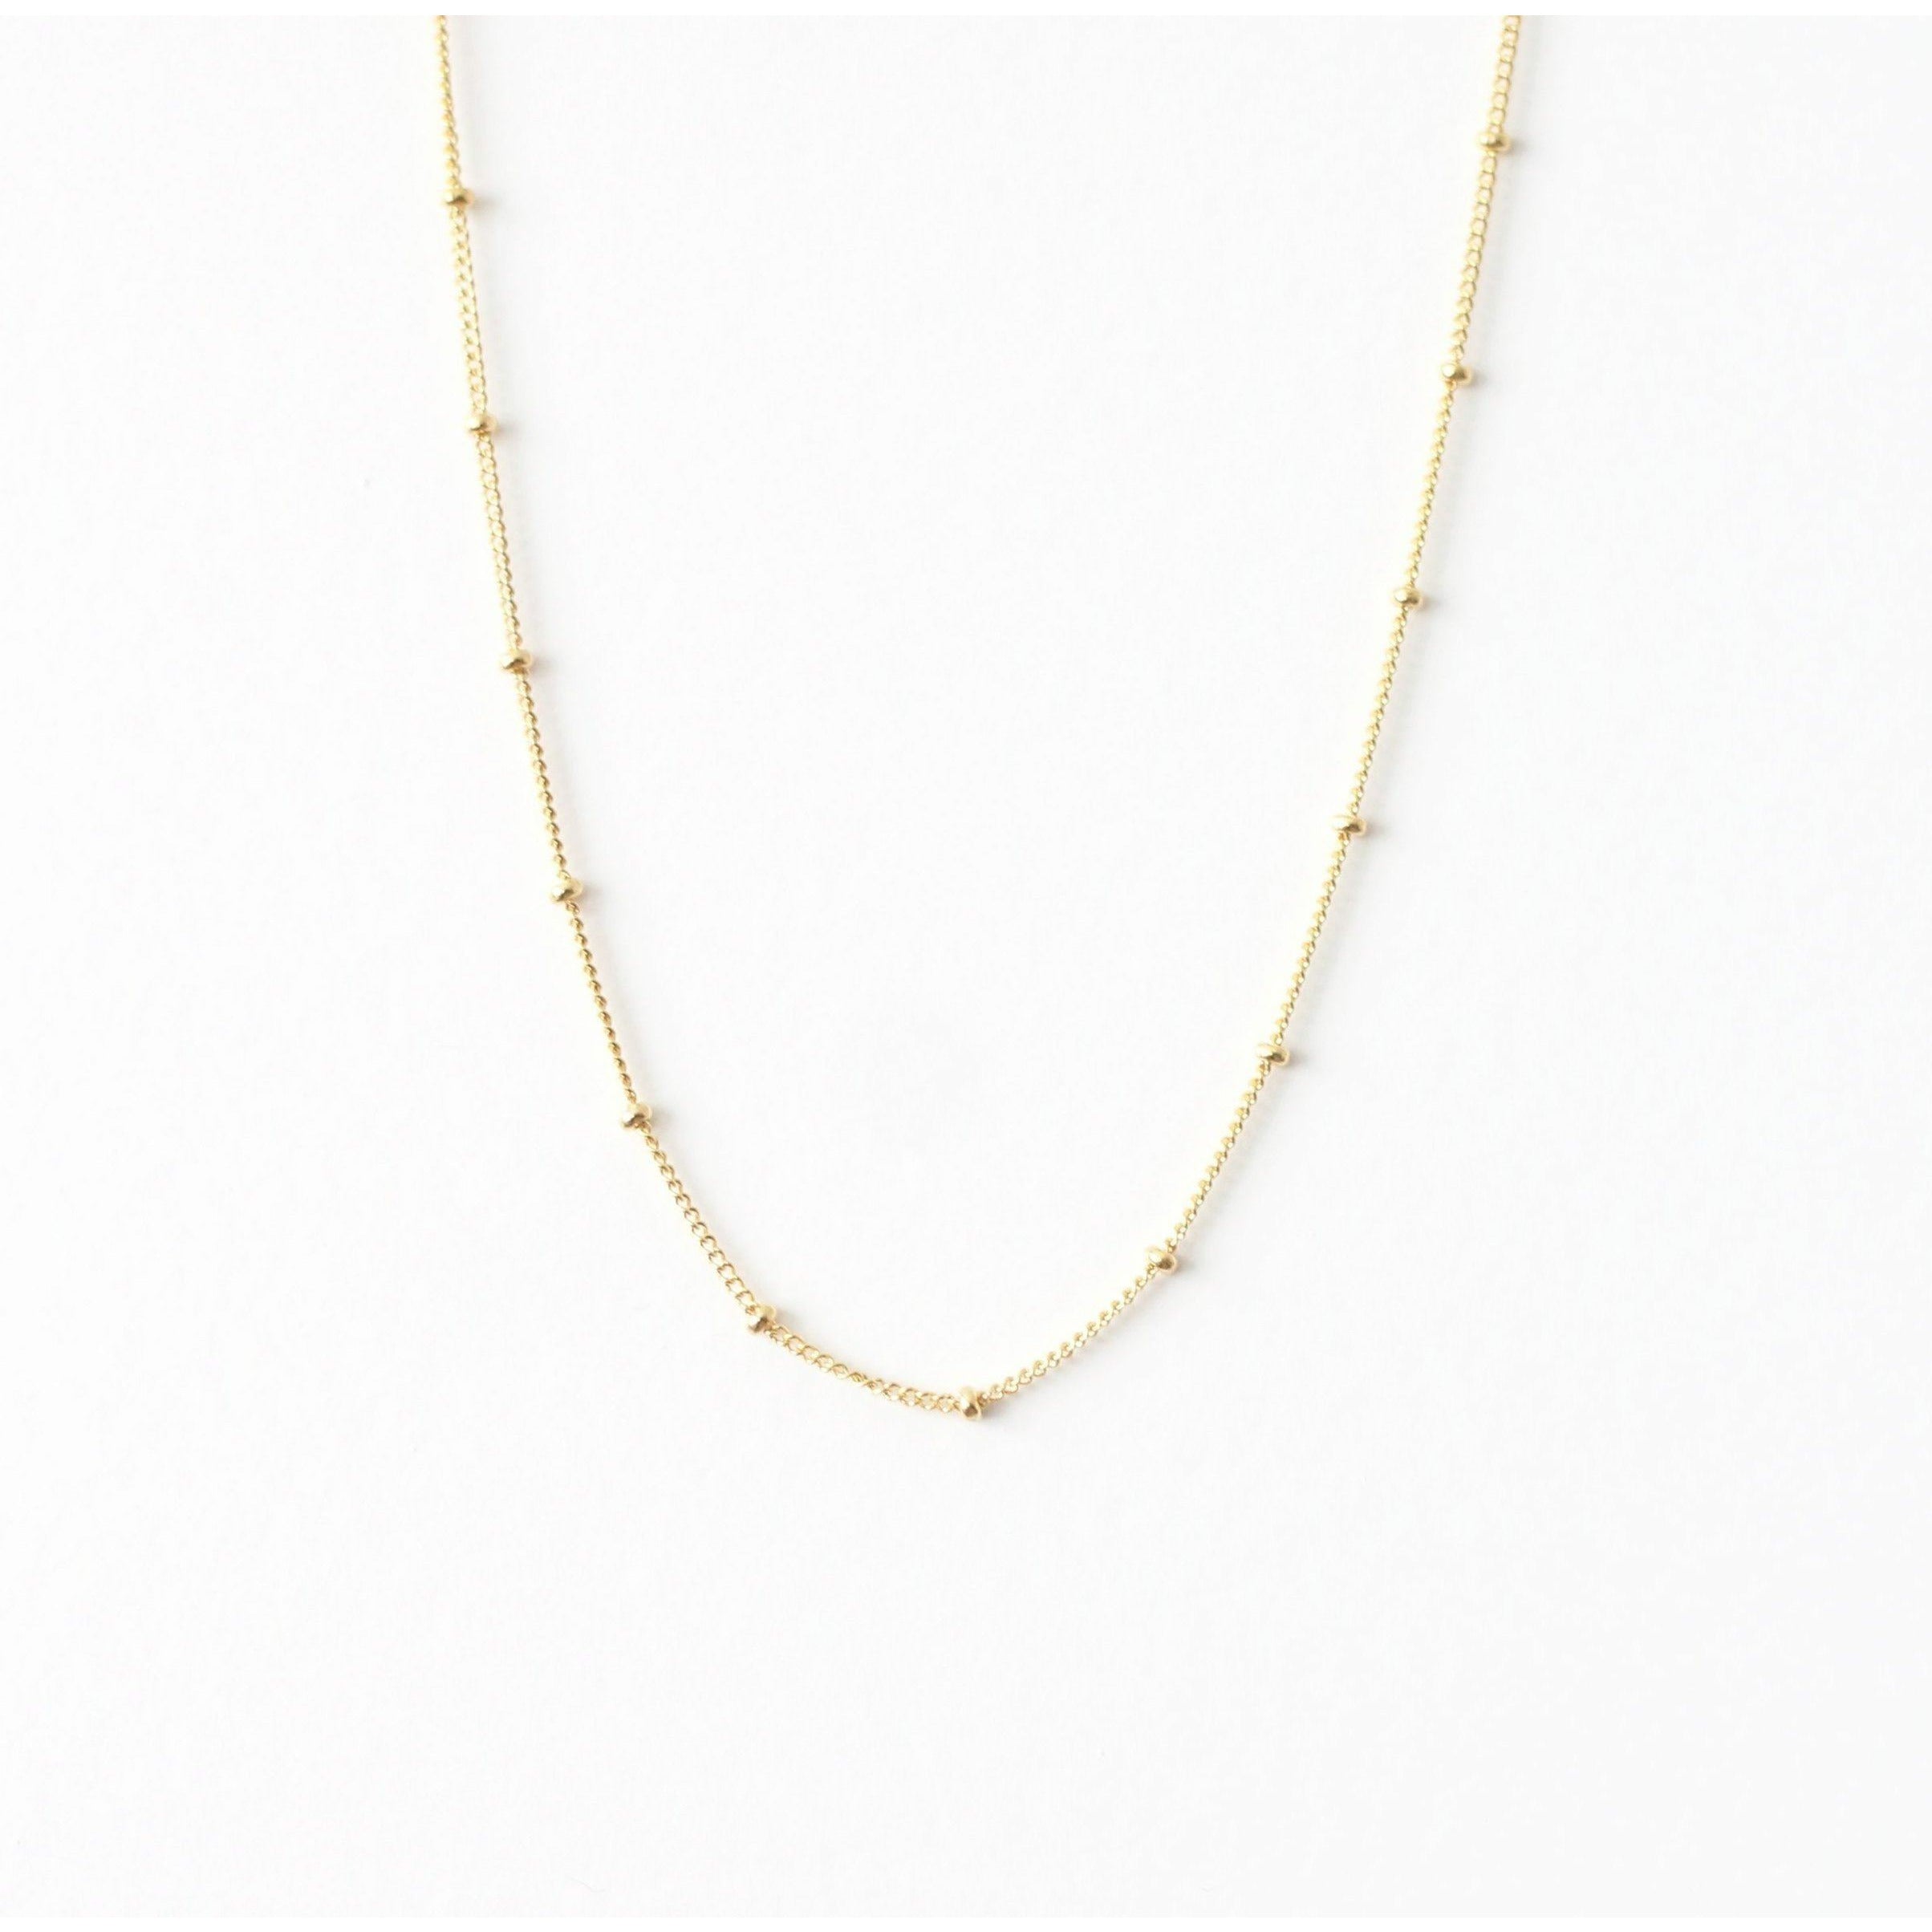 Minimal choker necklace in gold